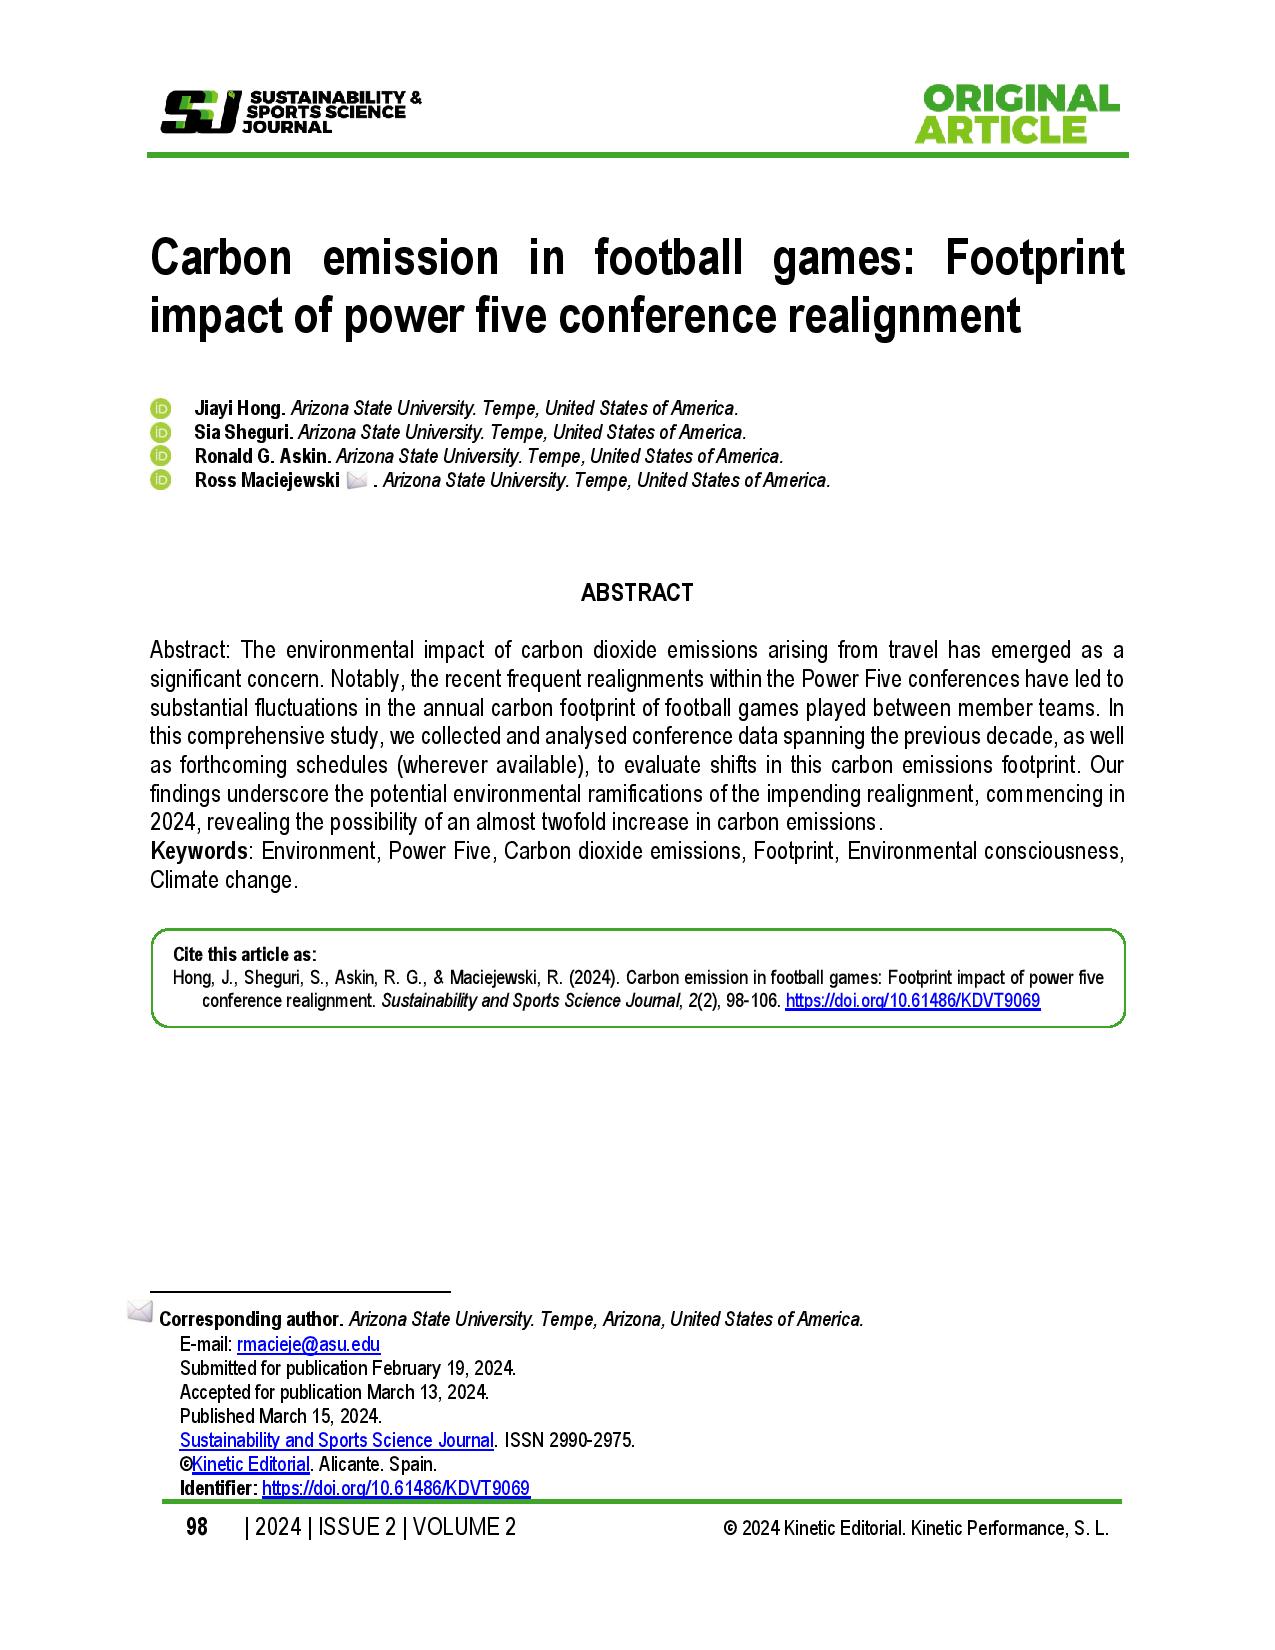 Carbon emission in football games: Footprint impact of power five conference realignment